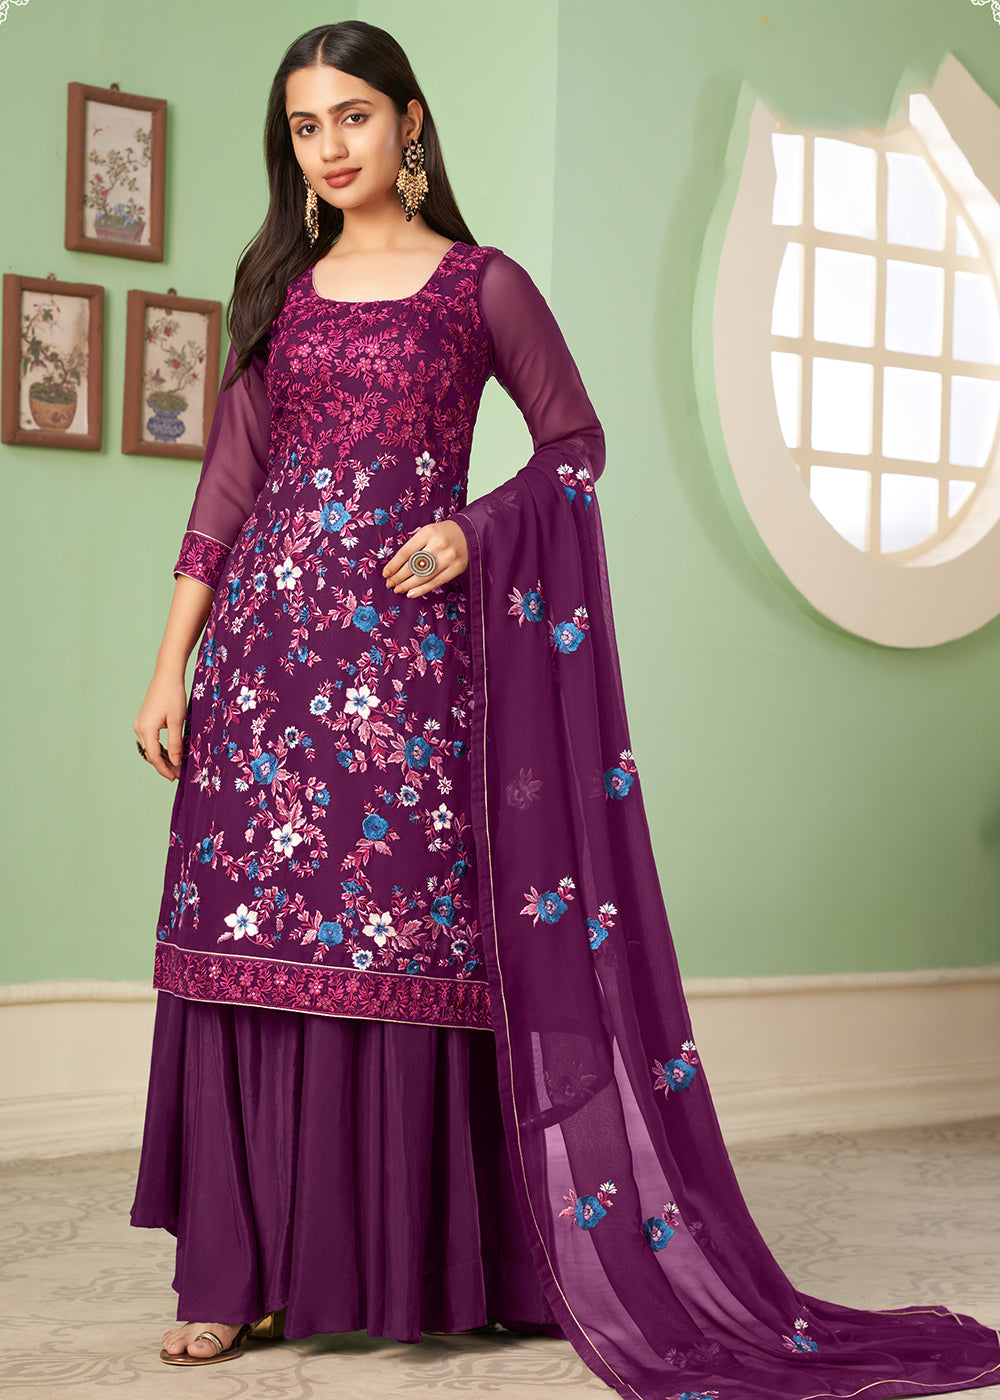 Buy Now Multi Thread Glorious Purple Georgette Palazzo Salwar Suit Online in USA, UK, Canada & Worldwide at Empress Clothing.